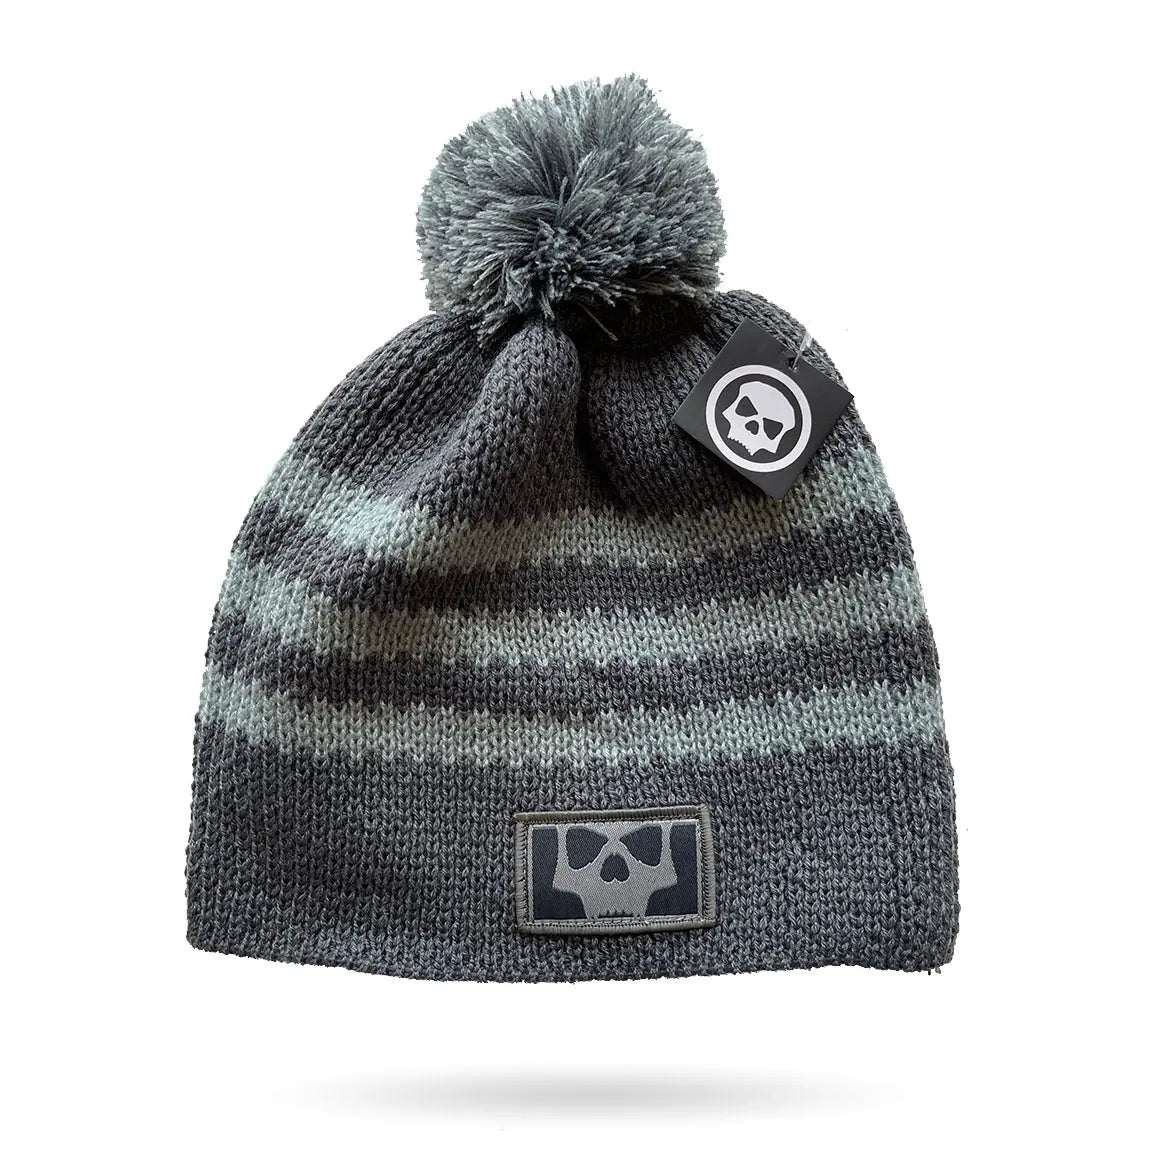 Infamous Knit Beanie - Skull Icon Grey Infamous Paintball